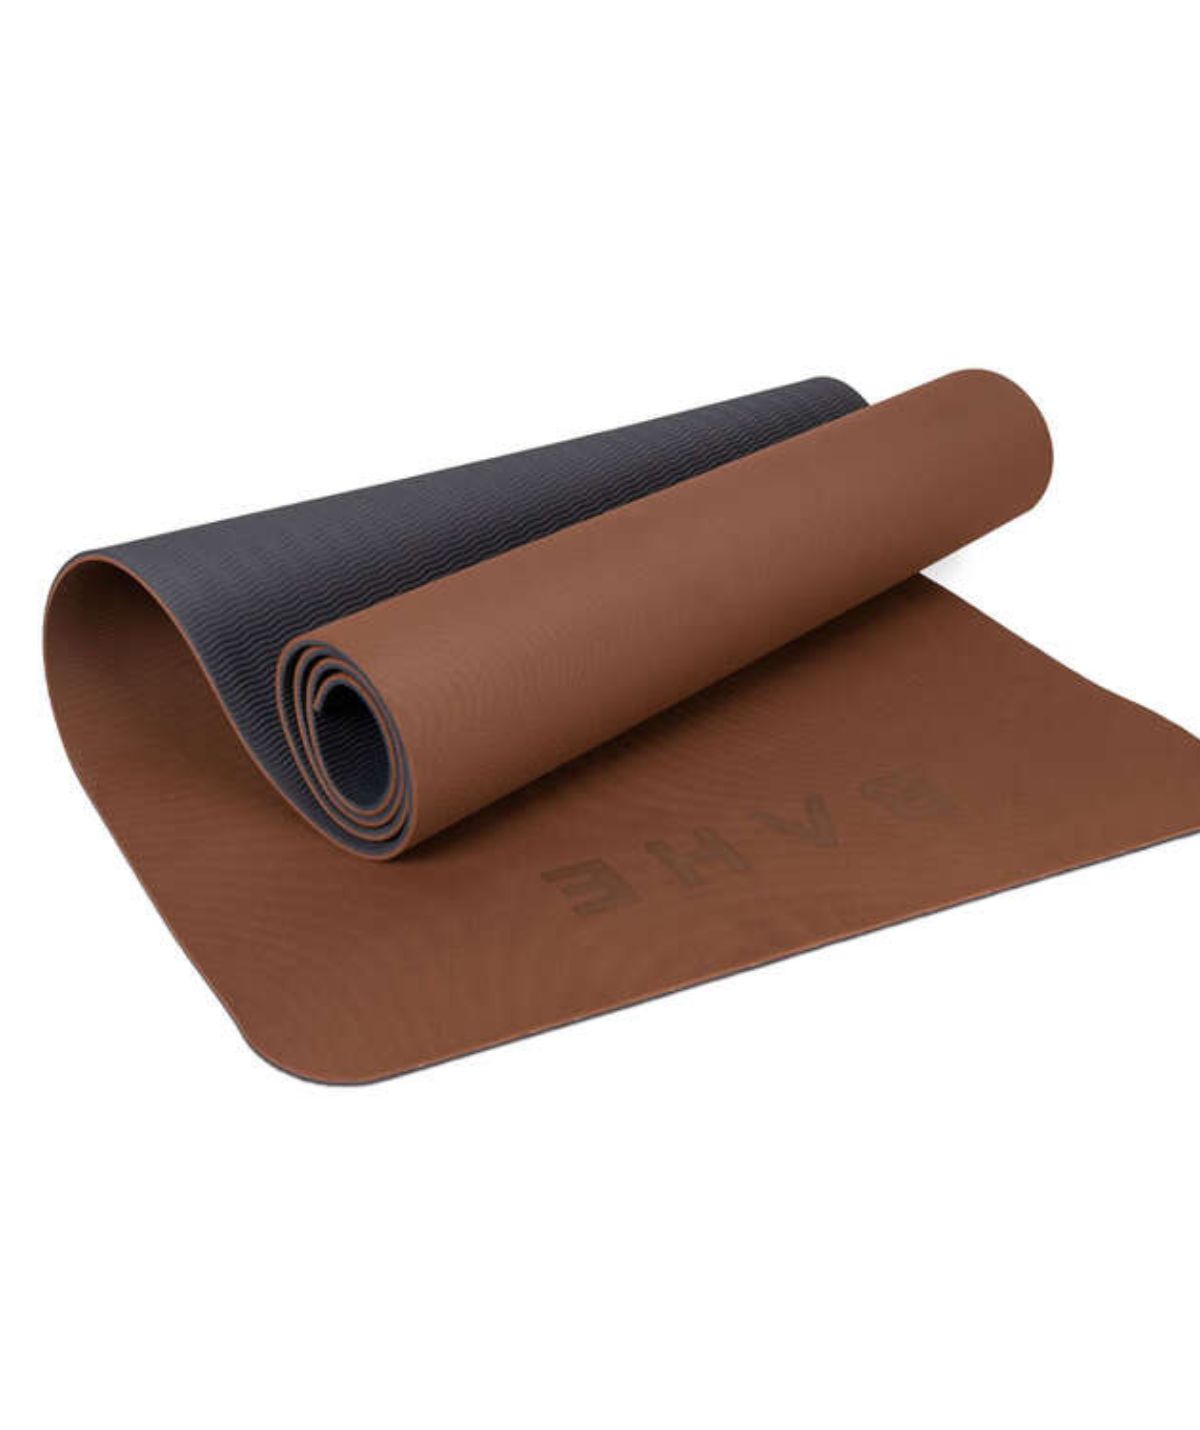 The Best Yoga Mats To Shop In Australia